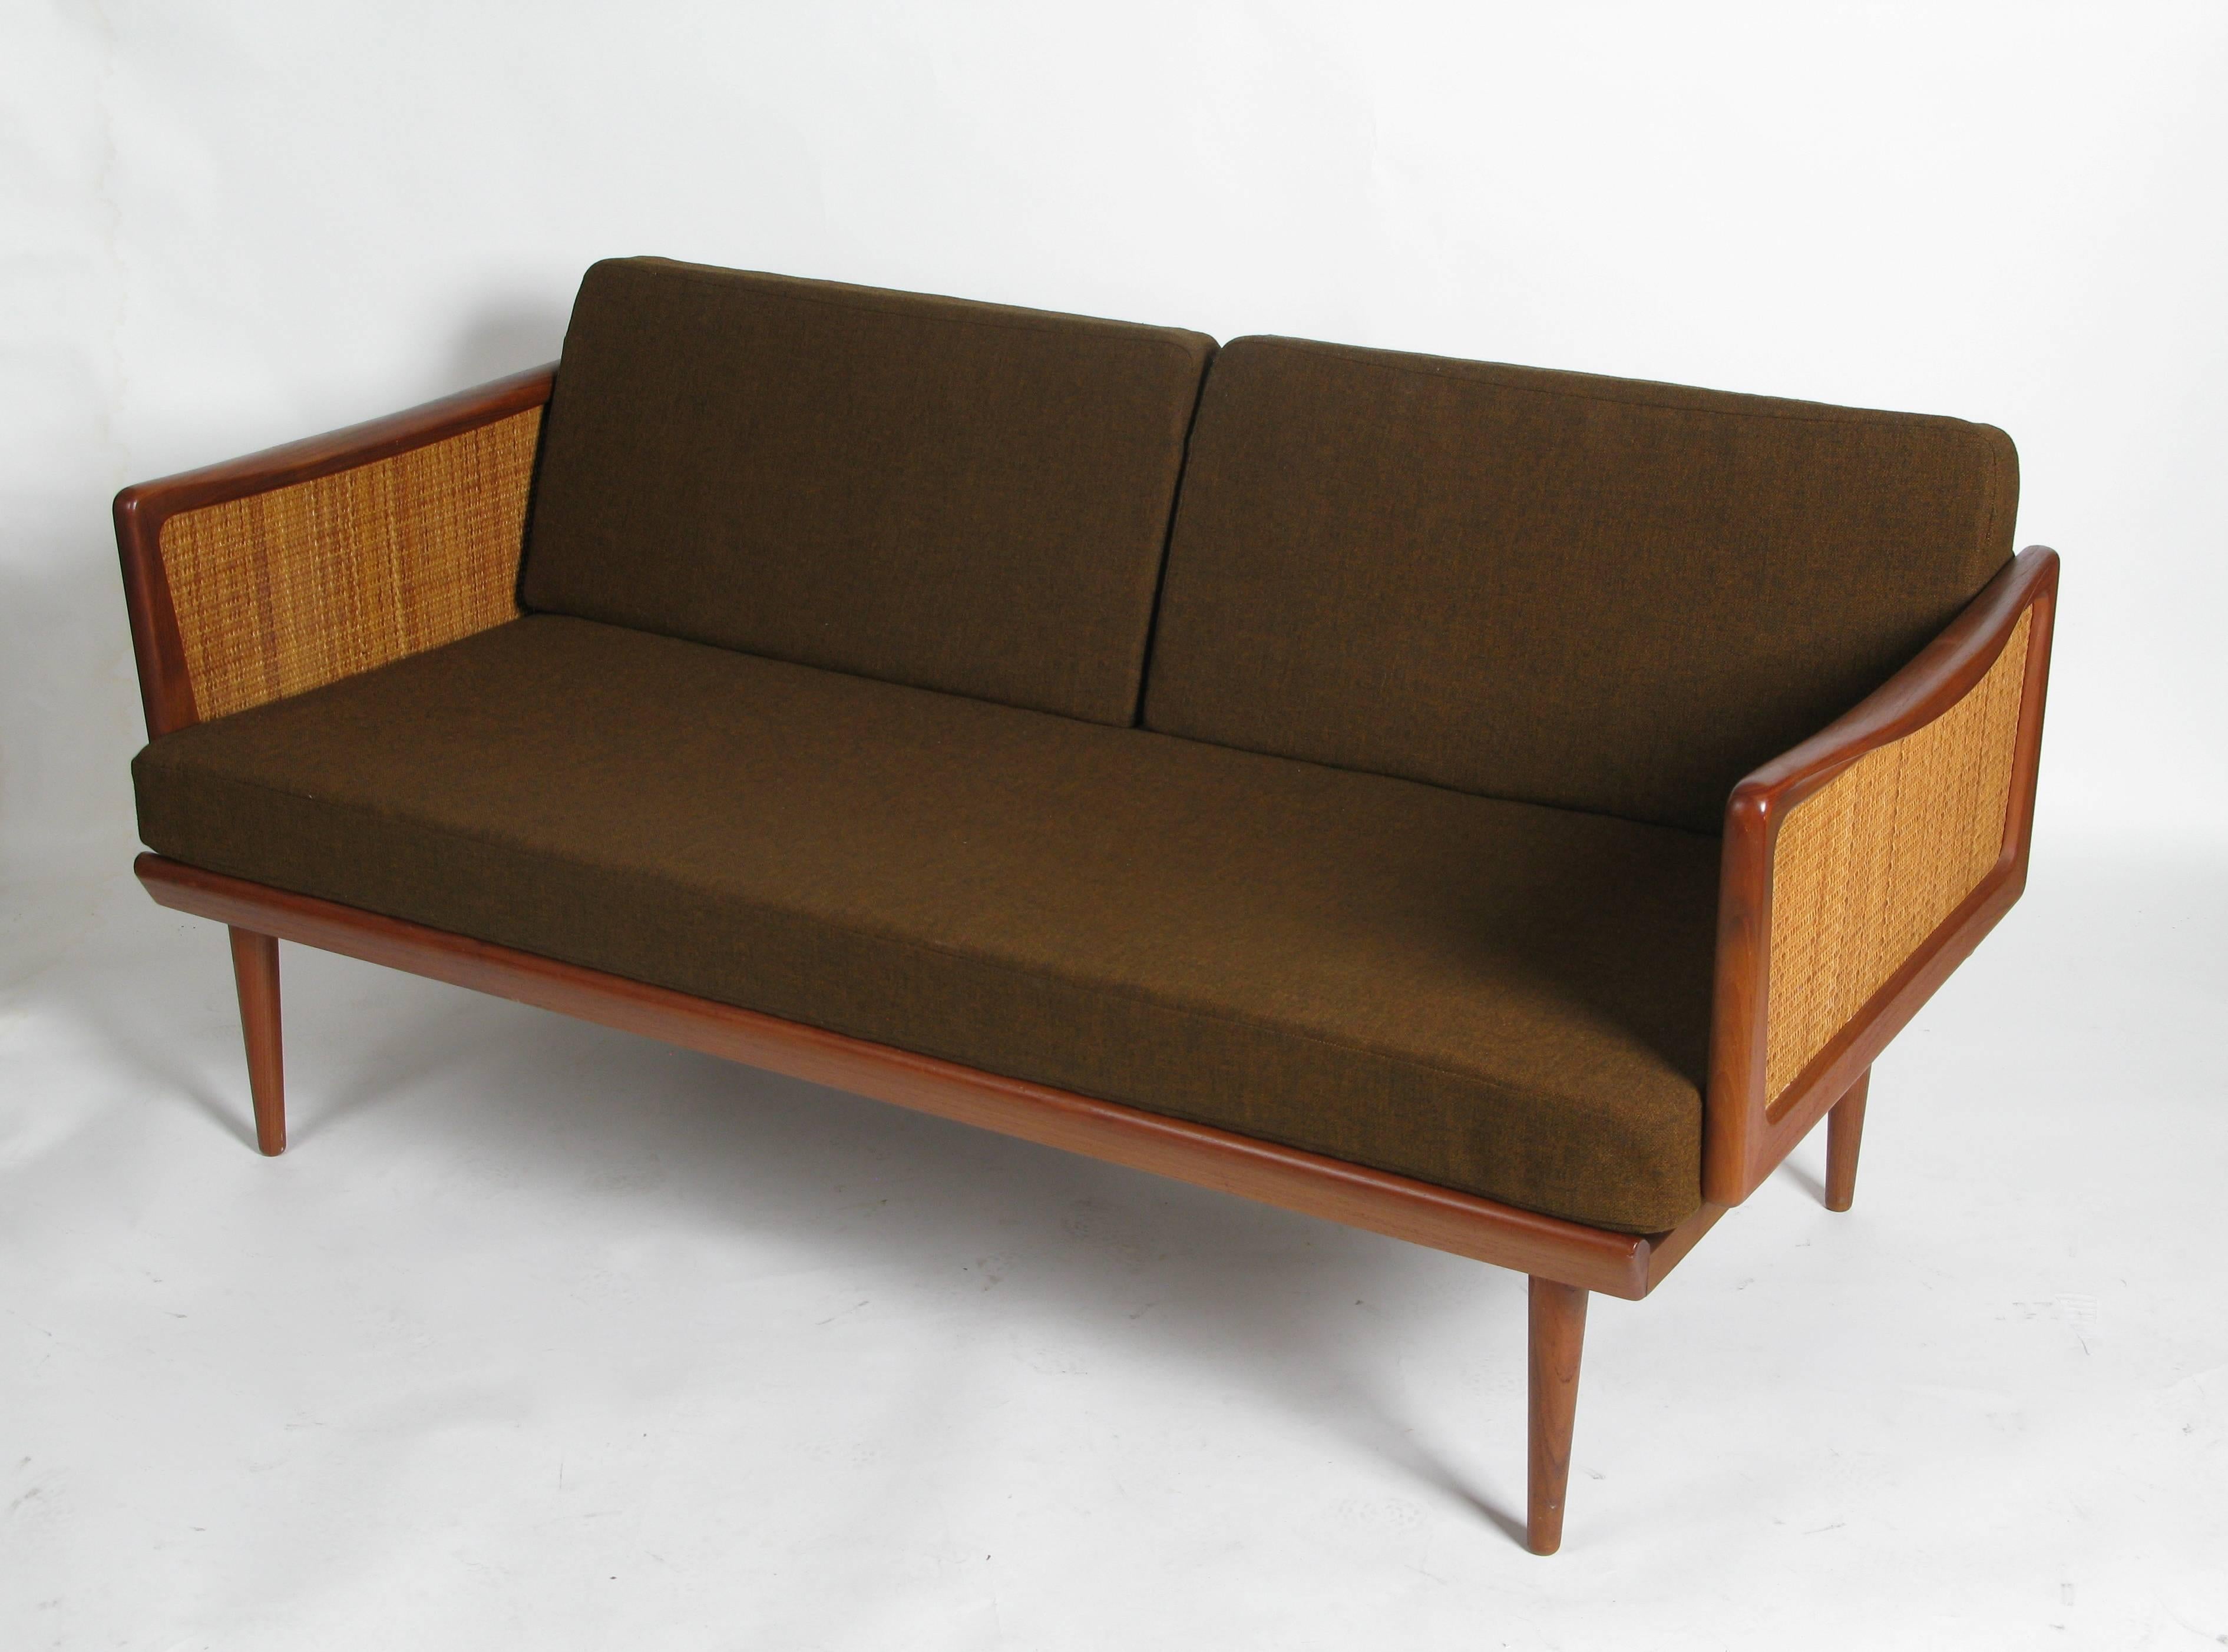 1960s model 453 daybed/sofa beautifully crafted of solid teak with modern cane arm detail by Peter Hvidt, Denmark.  Using solid brass hardware, the arms fold down extending the sofa to an extra long, single size bed.  All original and in excellent